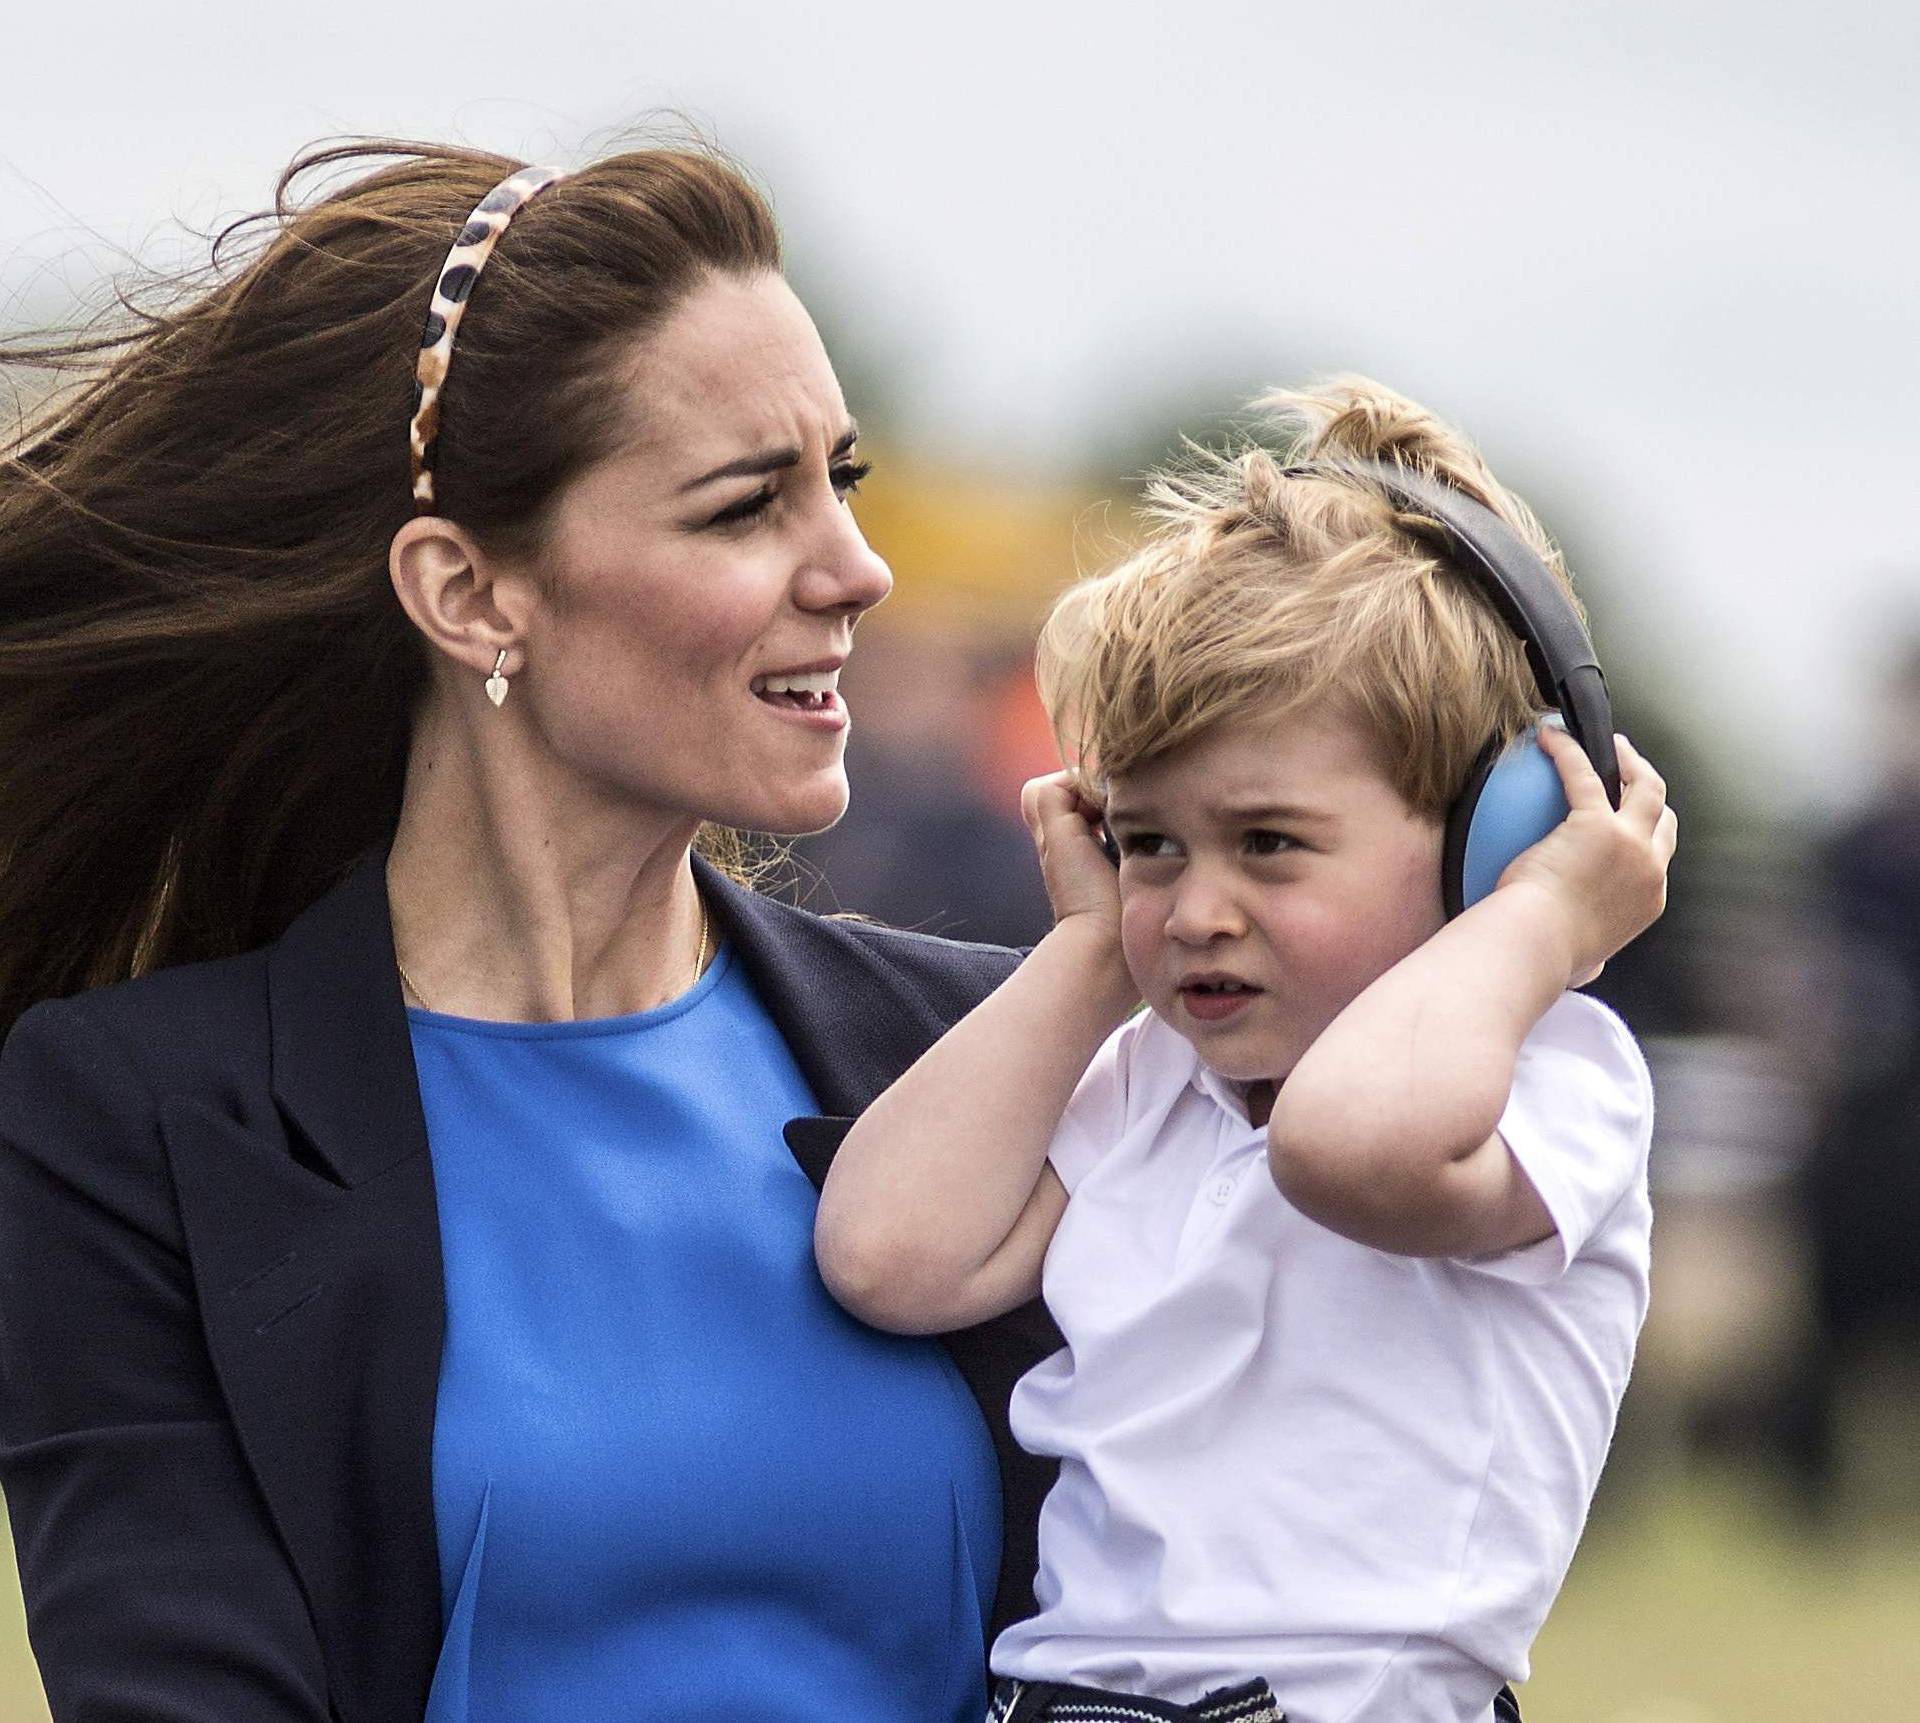 Prince George wears ear defenders against the roar of aircraft during a visit to the Royal international air tattoo at RAF Fairford